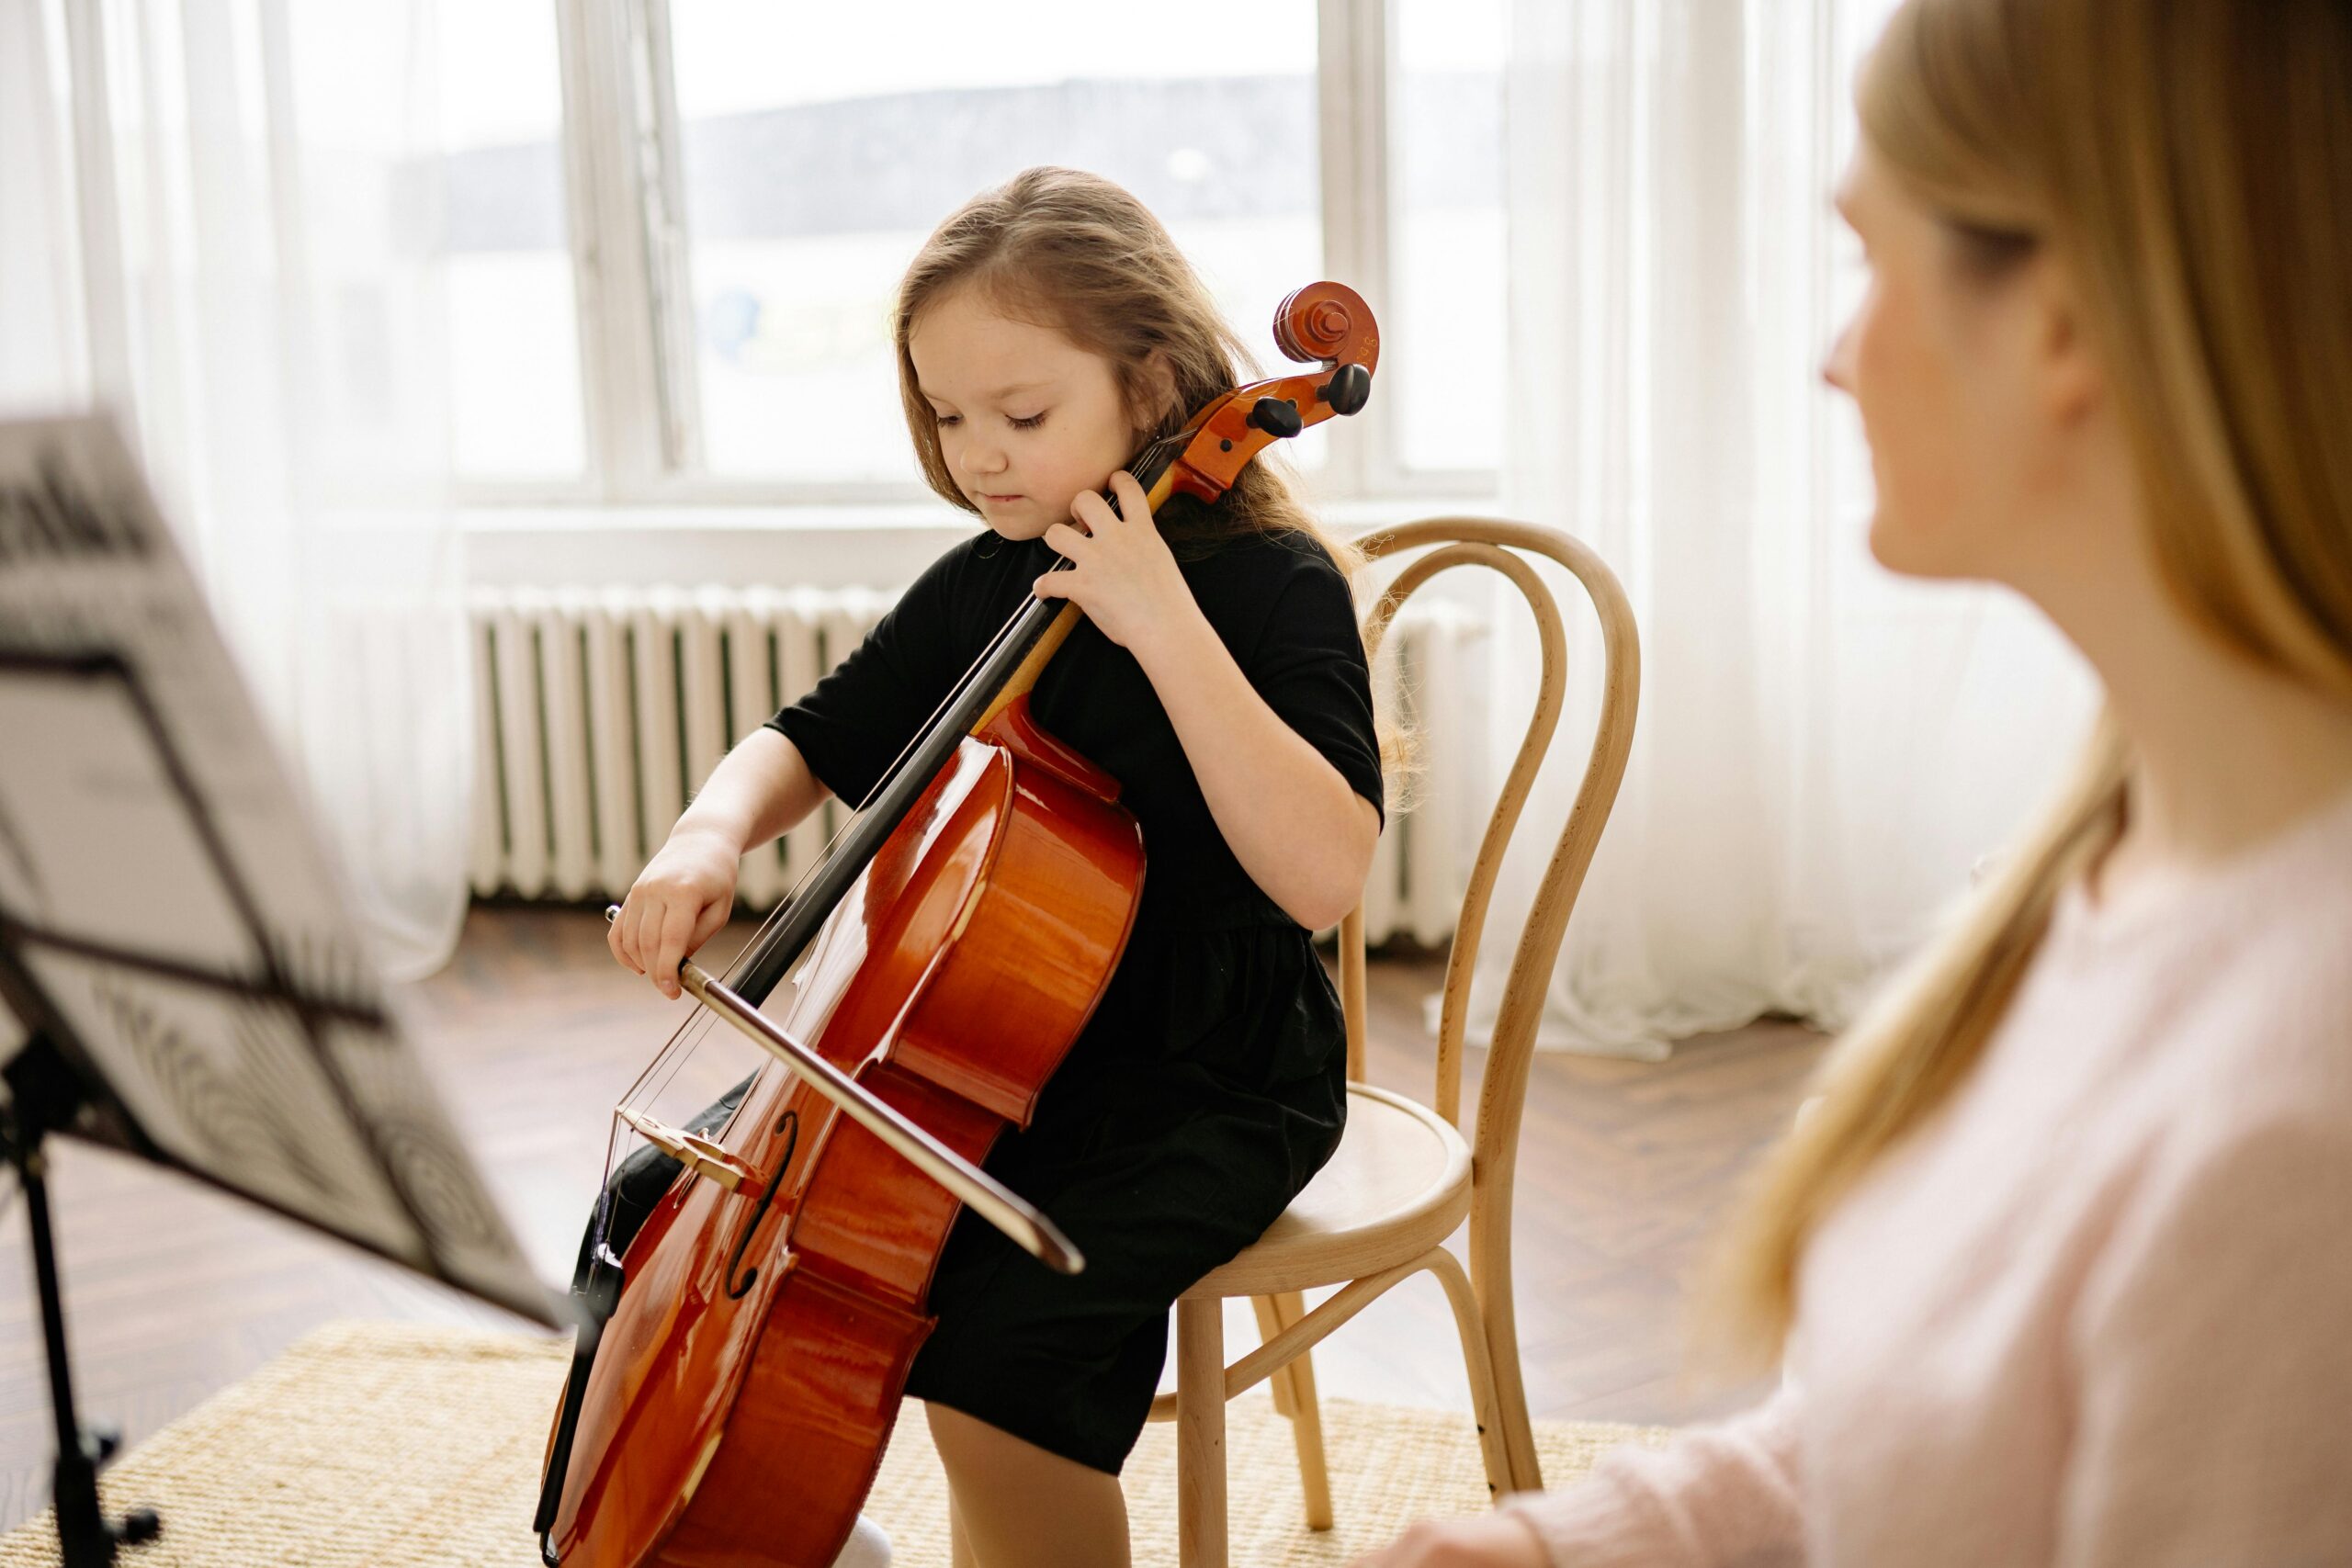 These are the 7 things to look for when you're choosing a music teacher